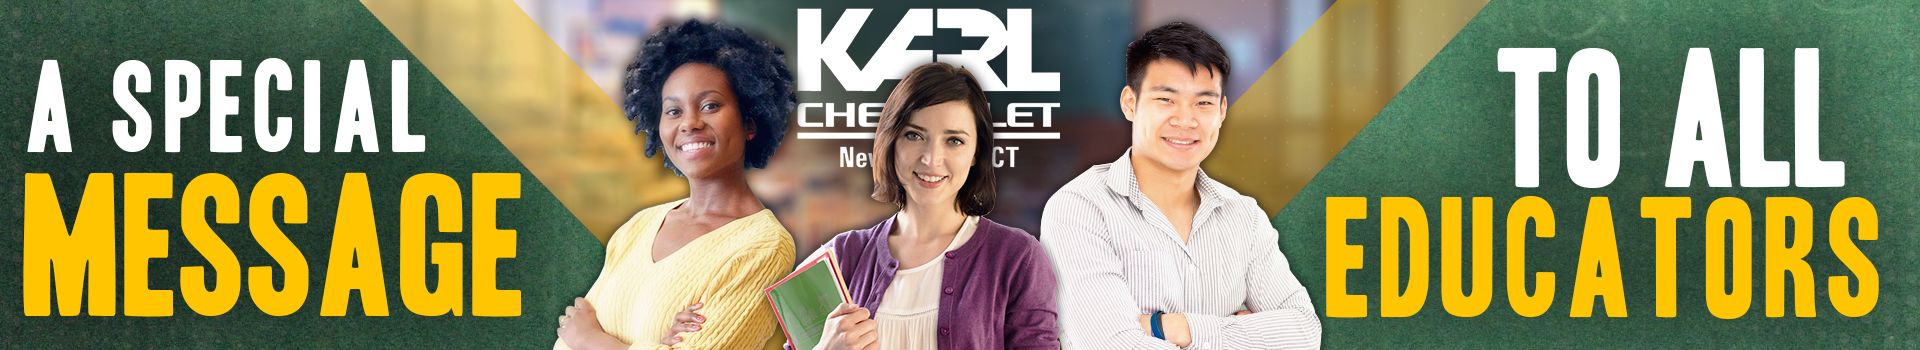 Educator Discount | Karl Chevrolet in New Canaan CT